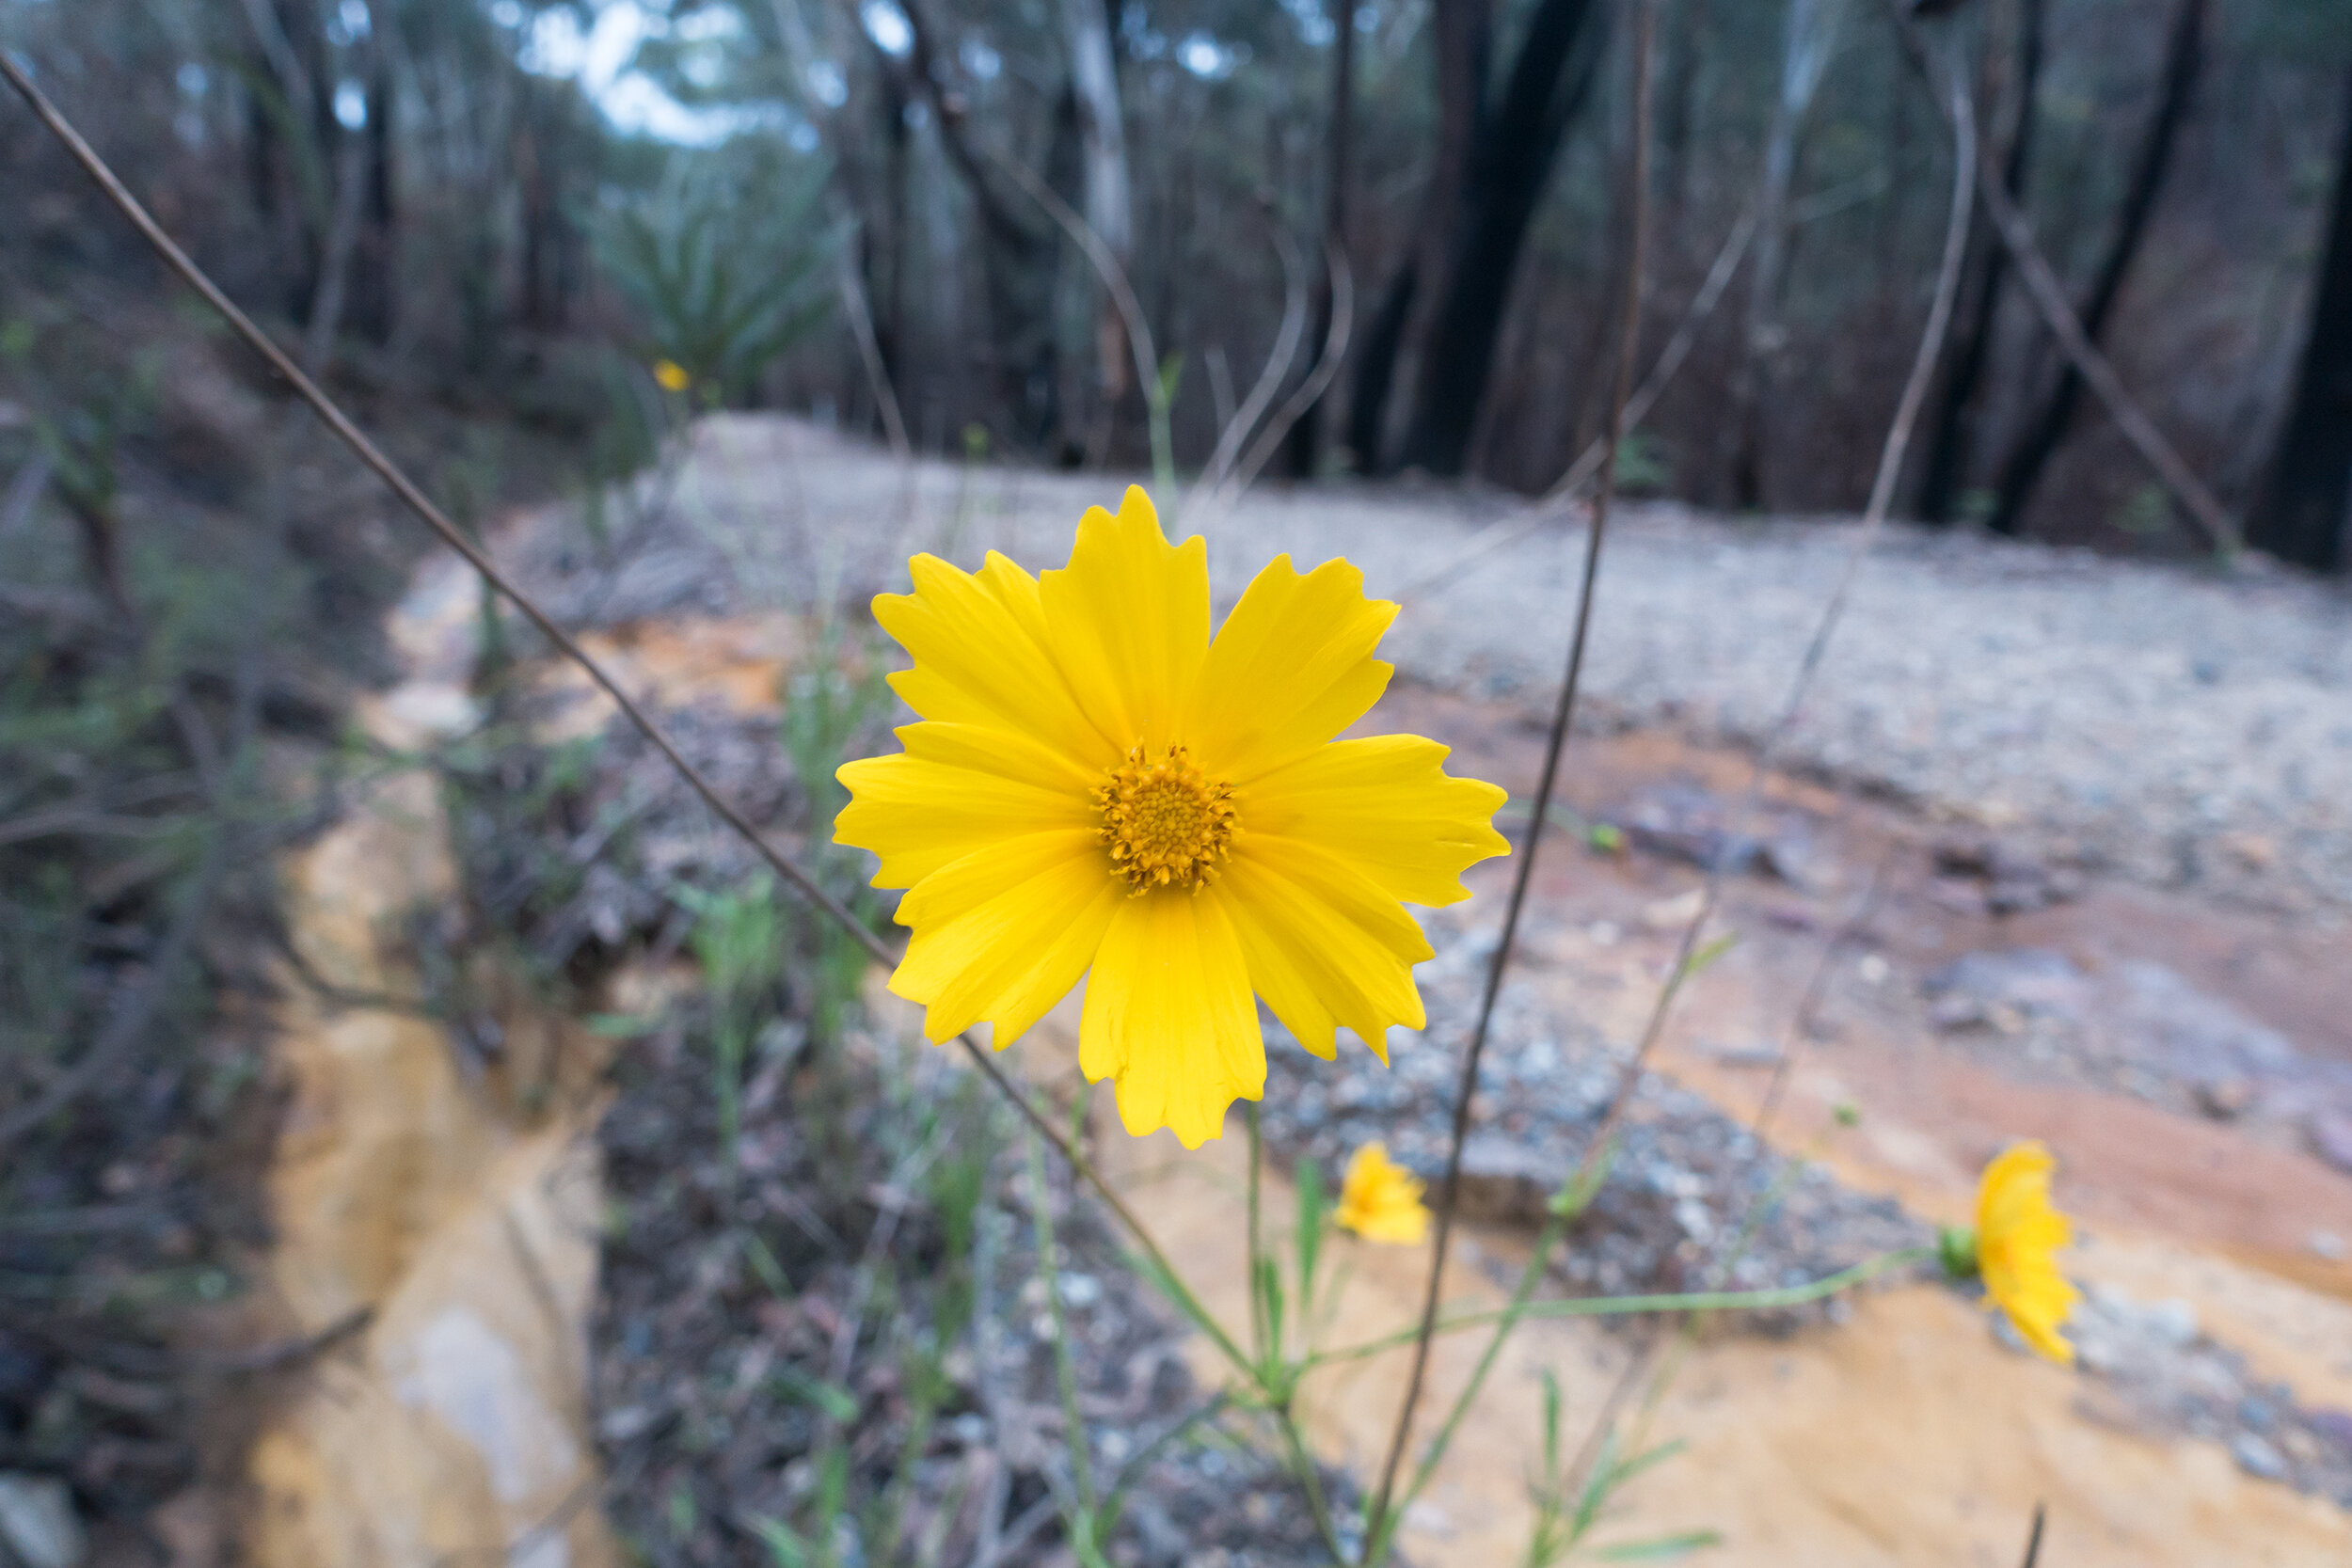 Sun 16 Feb 2020, Pierces Pass, Blue Mountains National Park, fire and rain, then flowers and frogs.